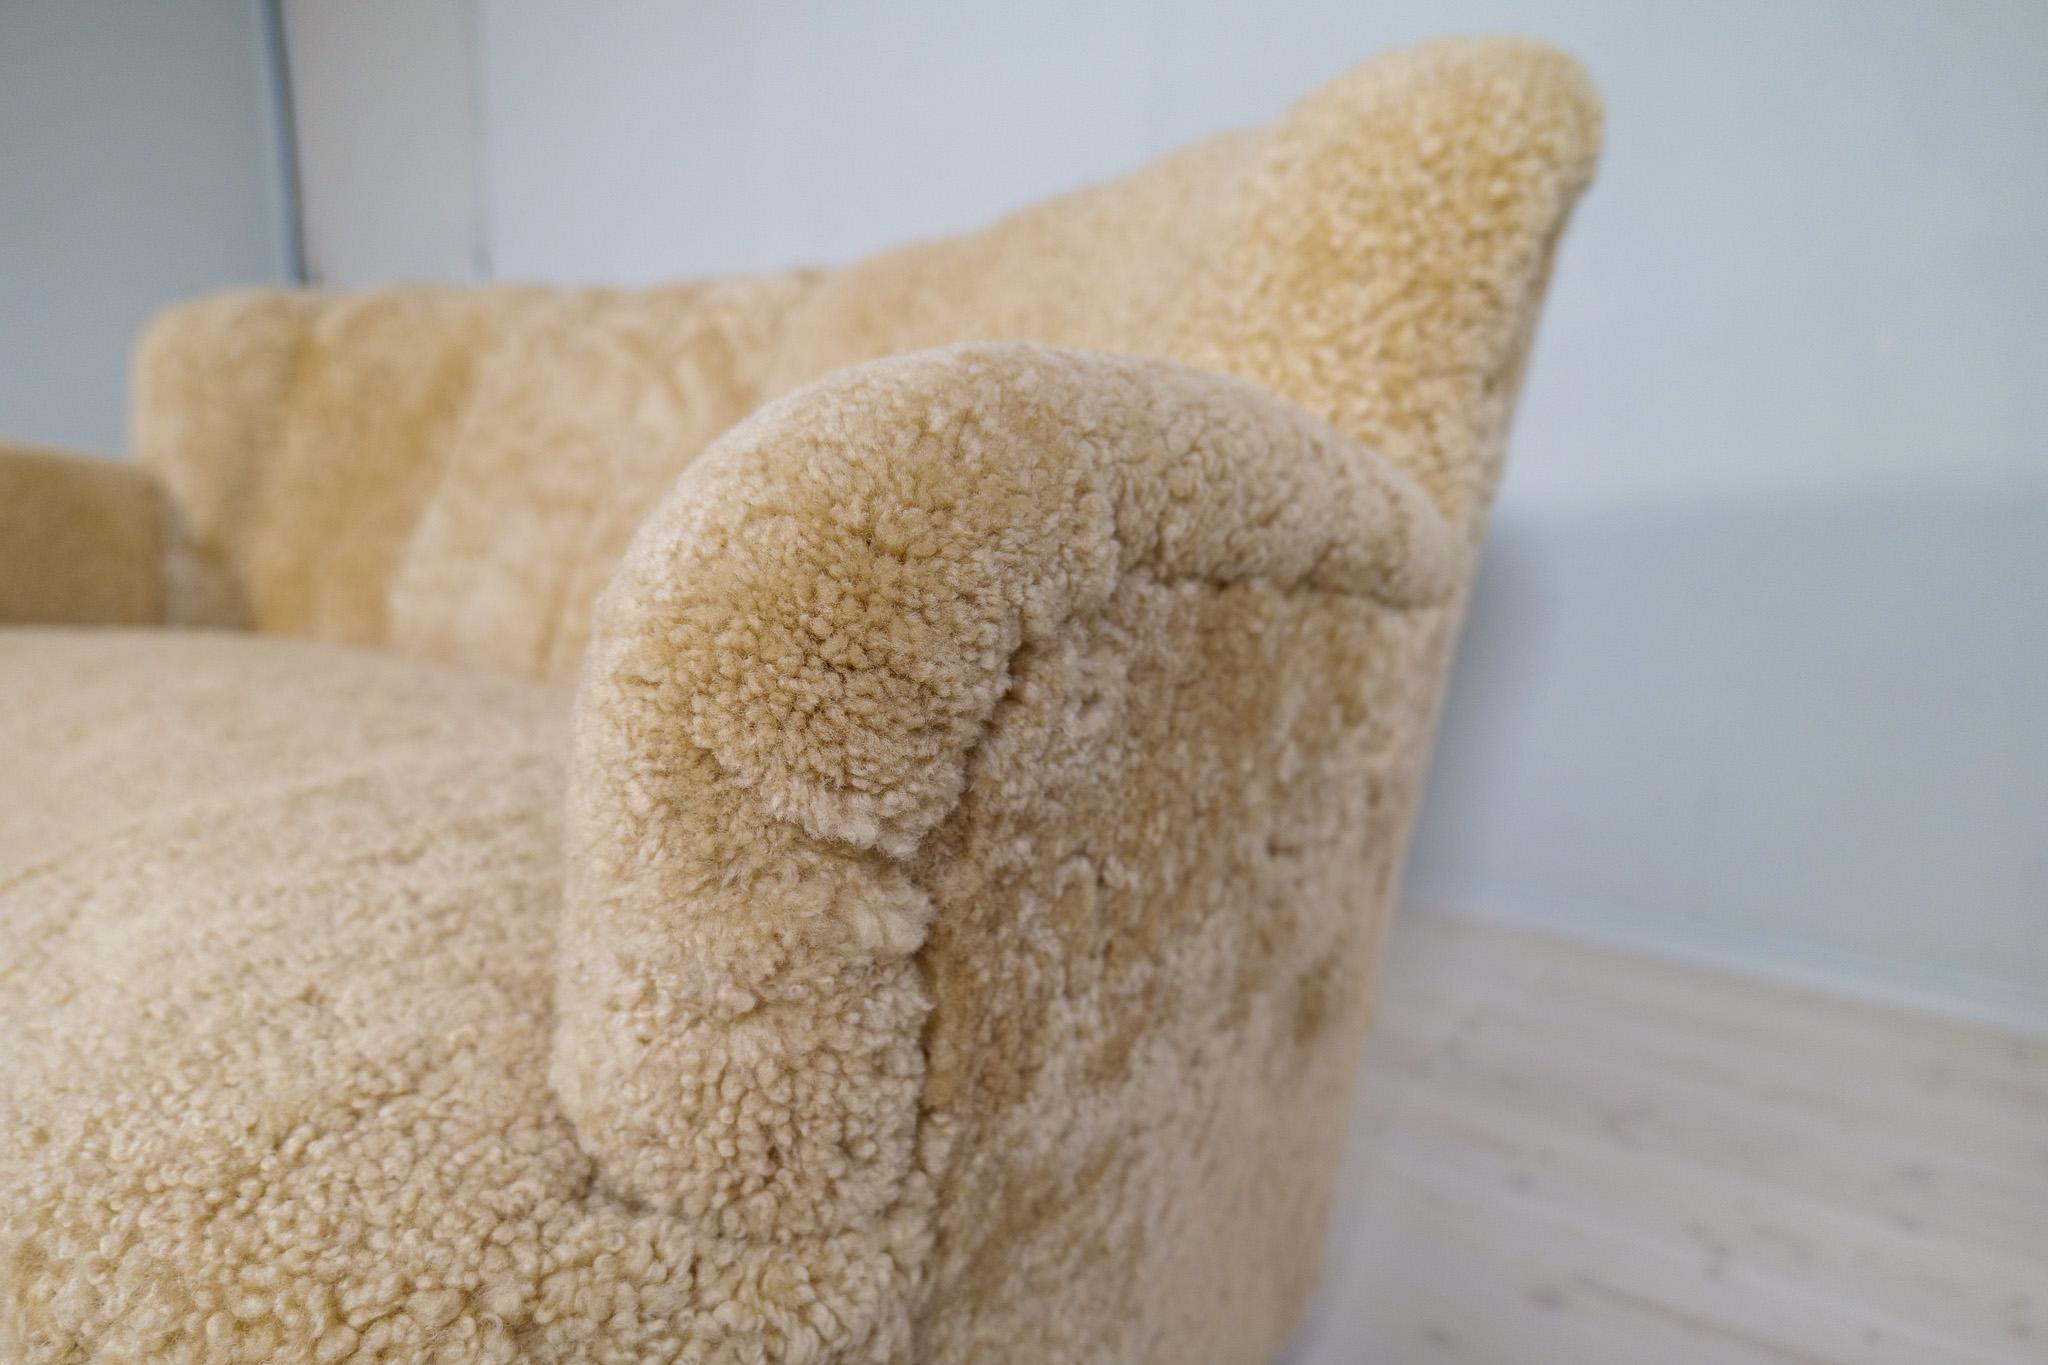 Midcentury Sculptrual Sheepskin/Shearling Sofa in Manors of Marta Blomstedt 4